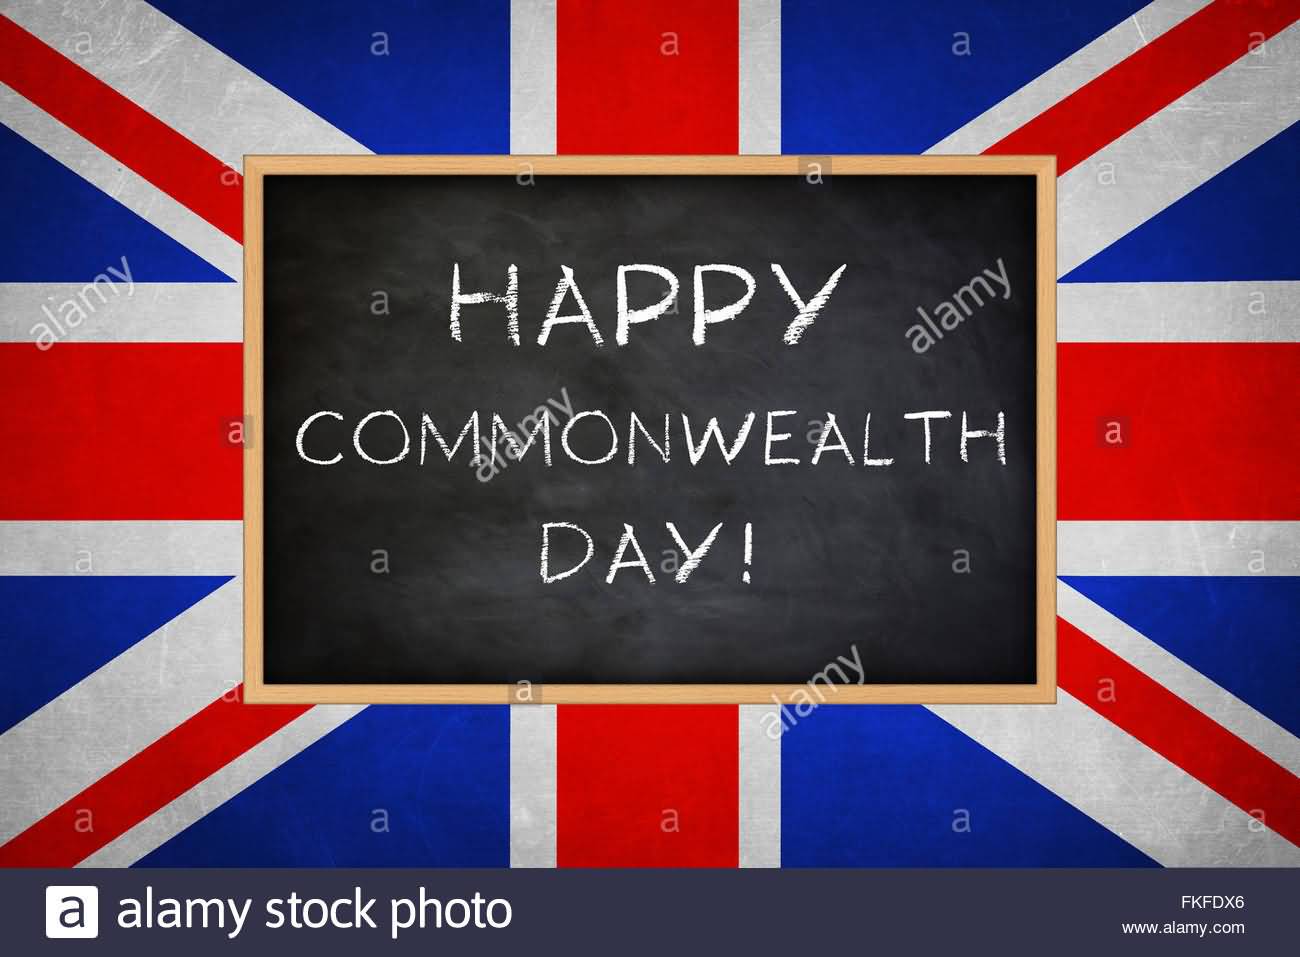 Happy Commonwealth Day Written With Chalk On Black Board With Union Flag In Background